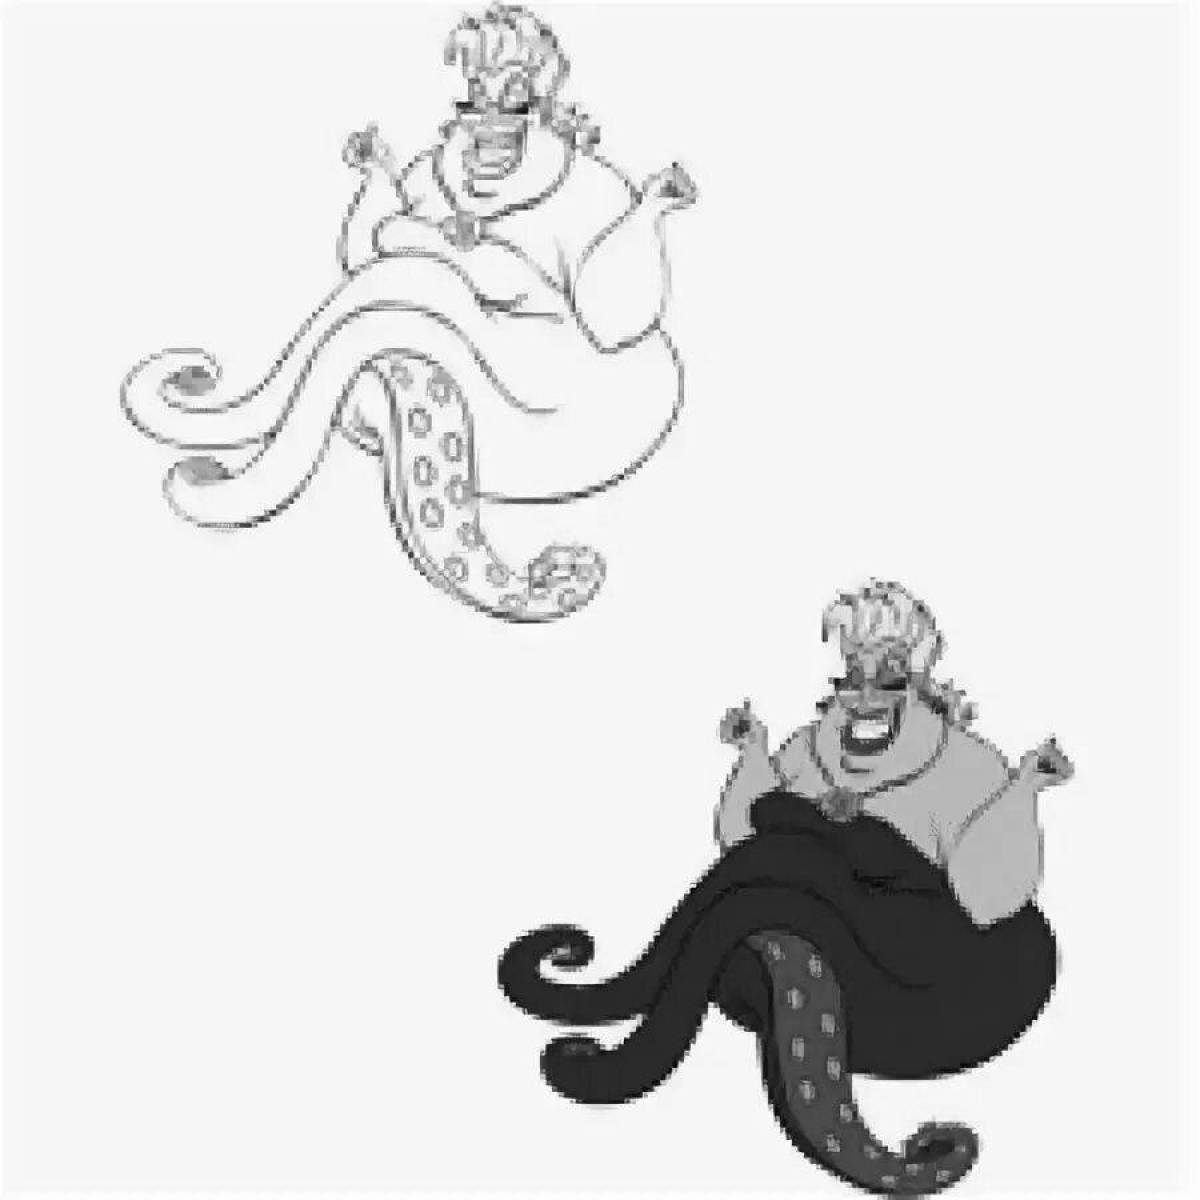 Ursula blooming coloring book